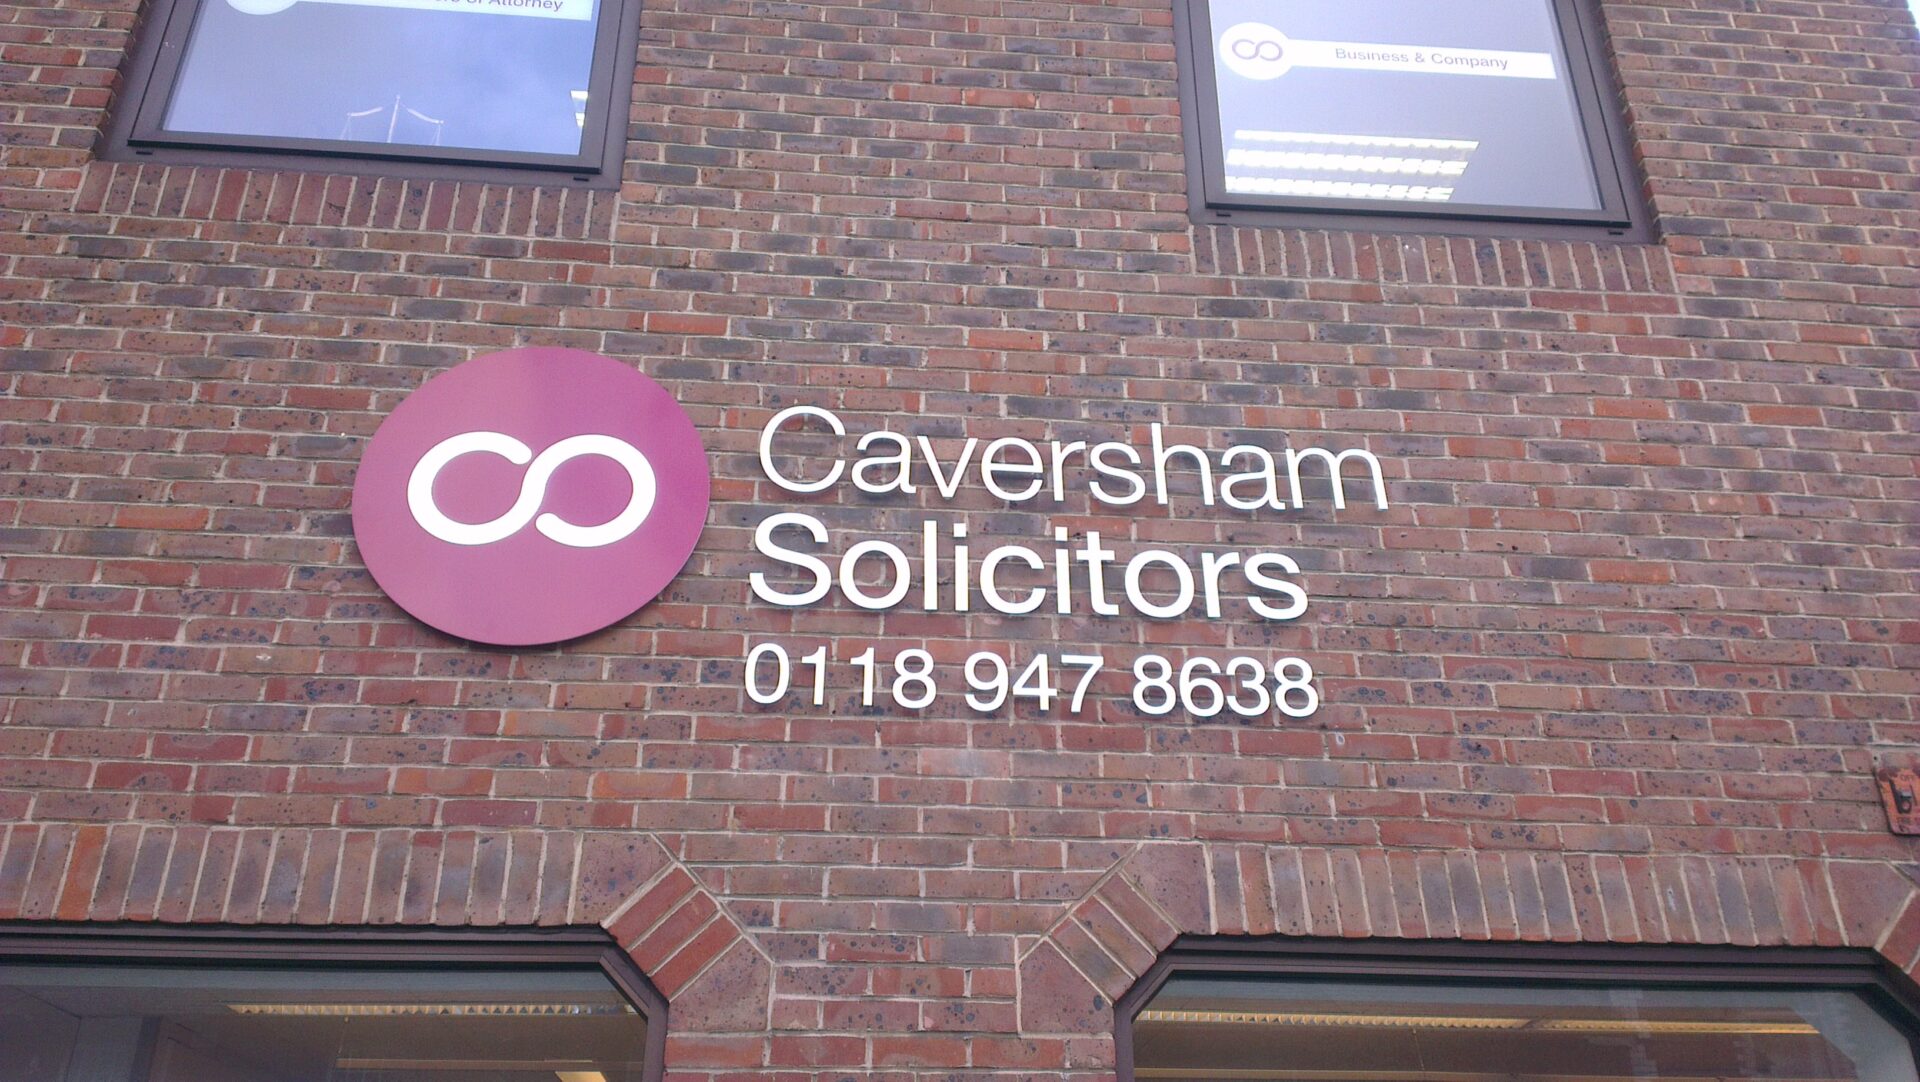 Caverhsam Solicitors new offices.jpg